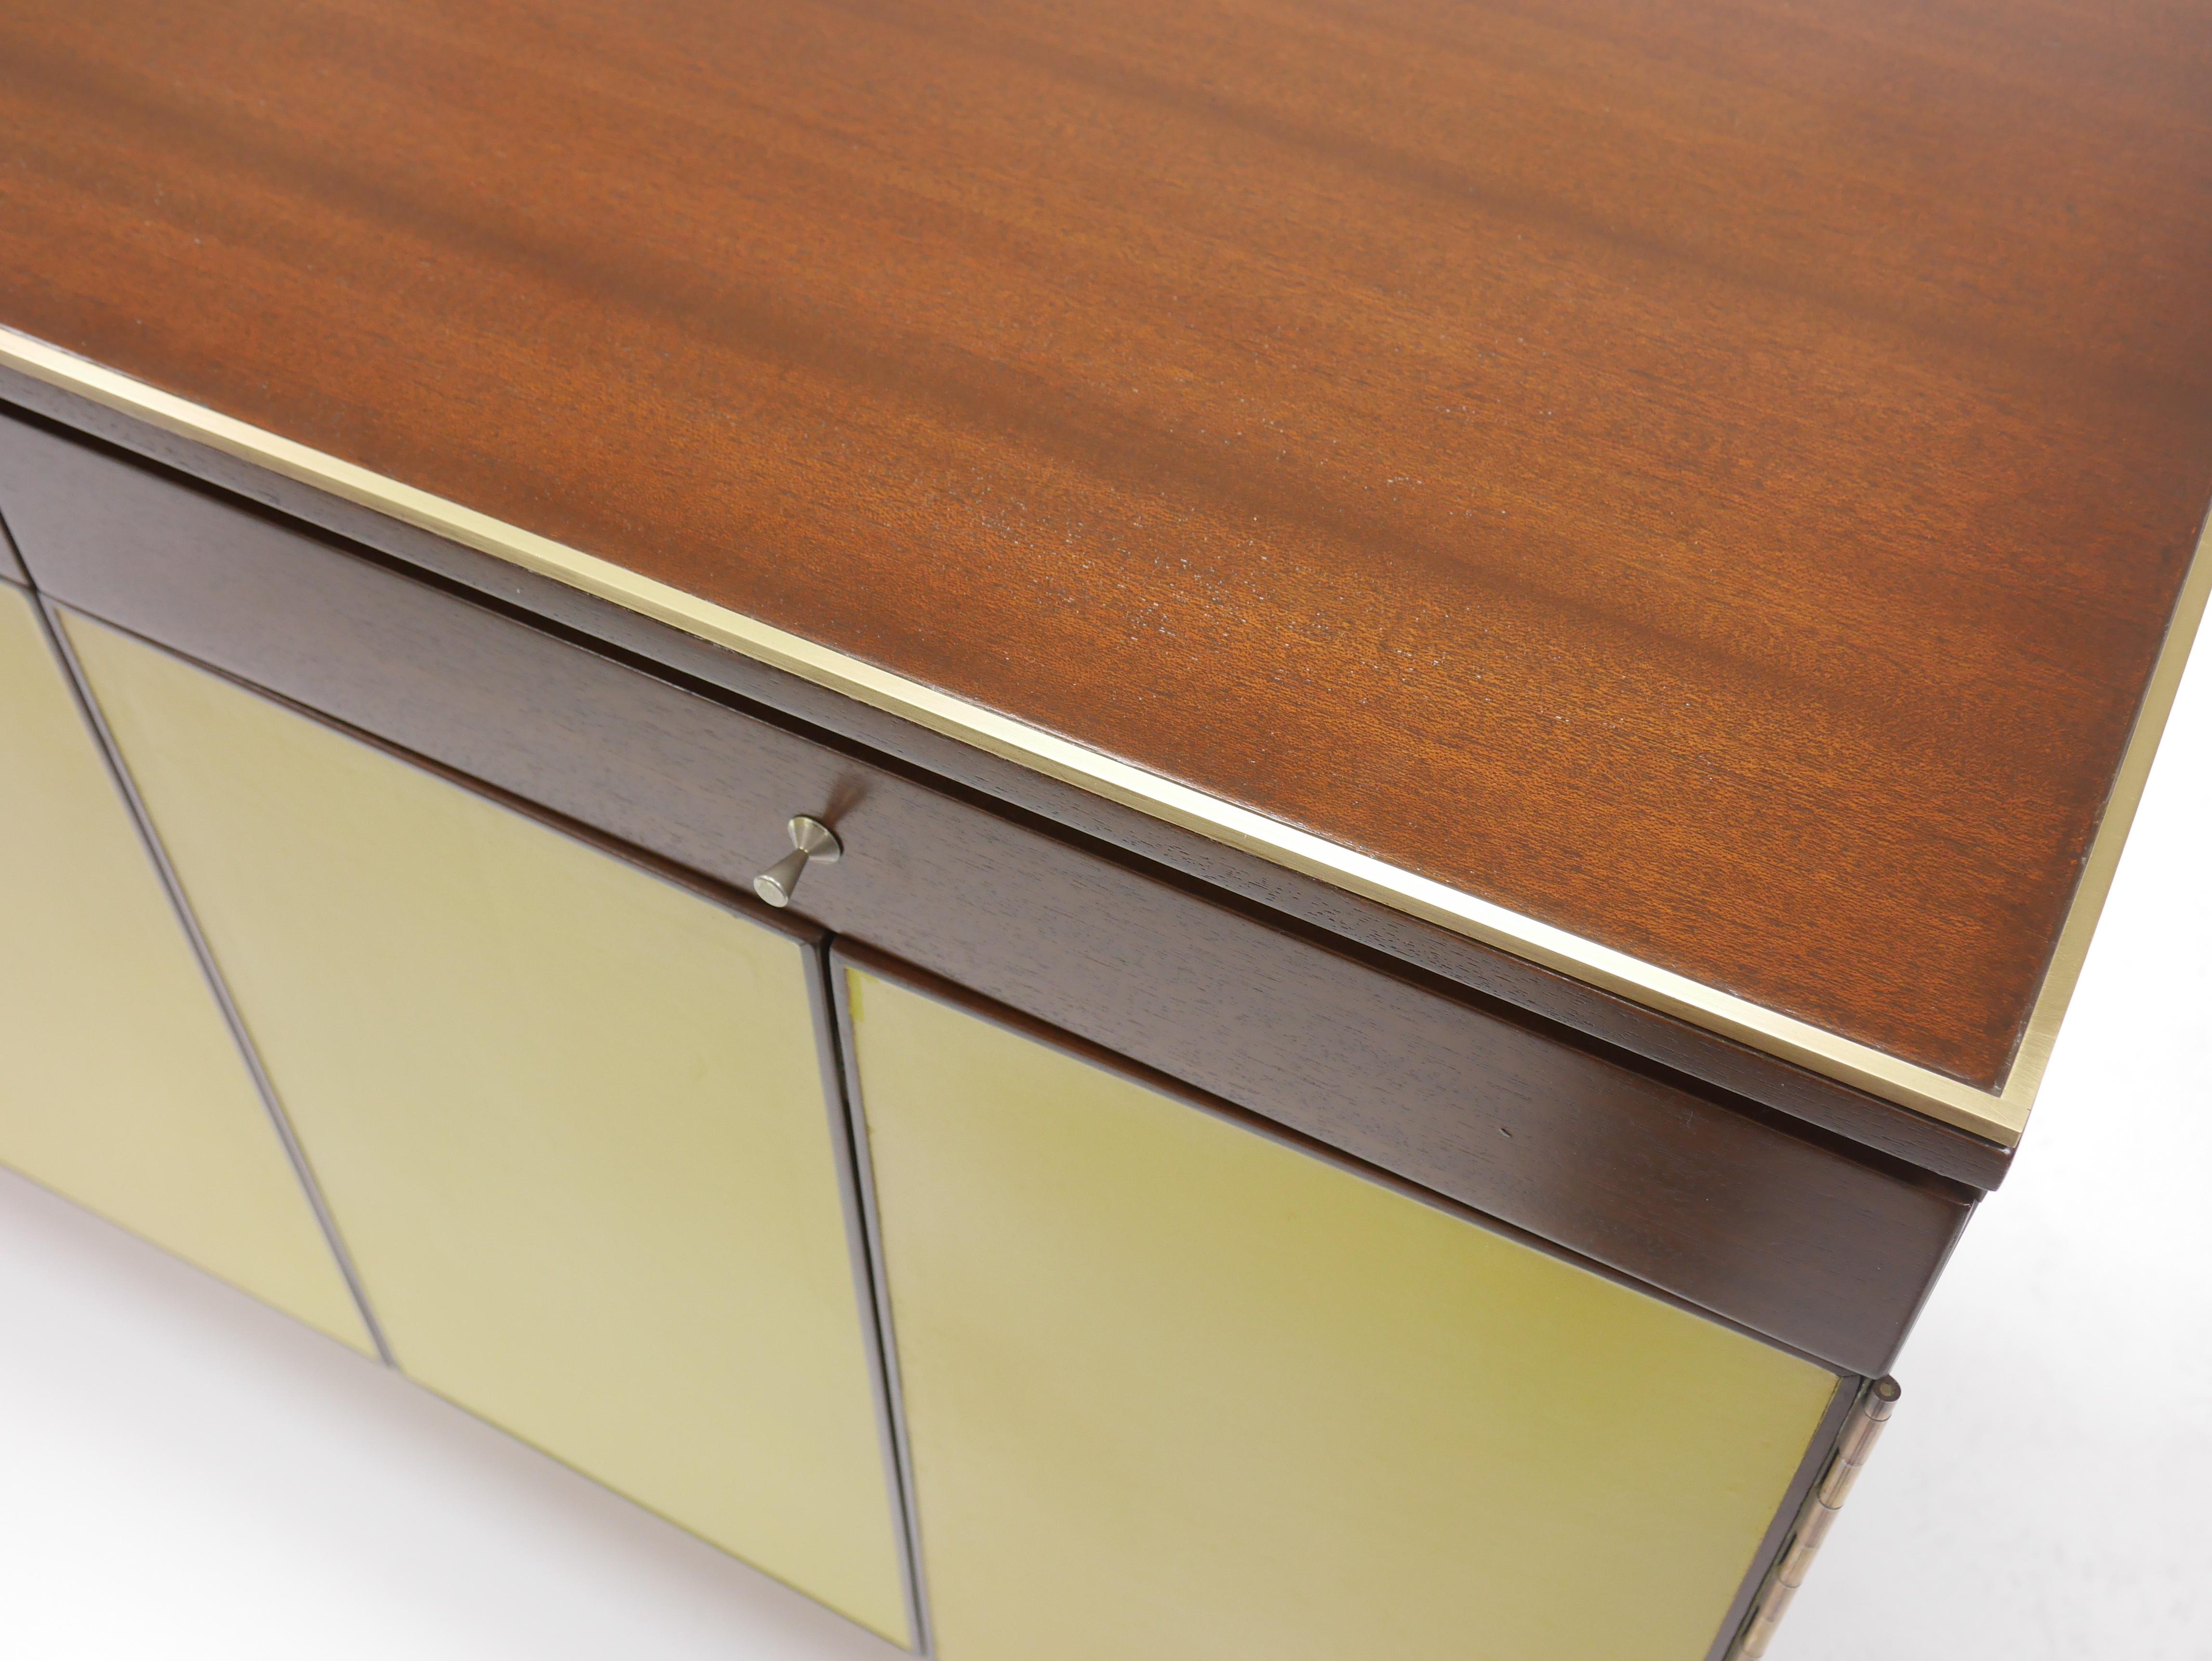 Unusual Paul McCobb for Calvin Group mahogany and leather front credenza with flat bar brass legs. Accordion trifold doors open to reveal 6 leather lined drawers.